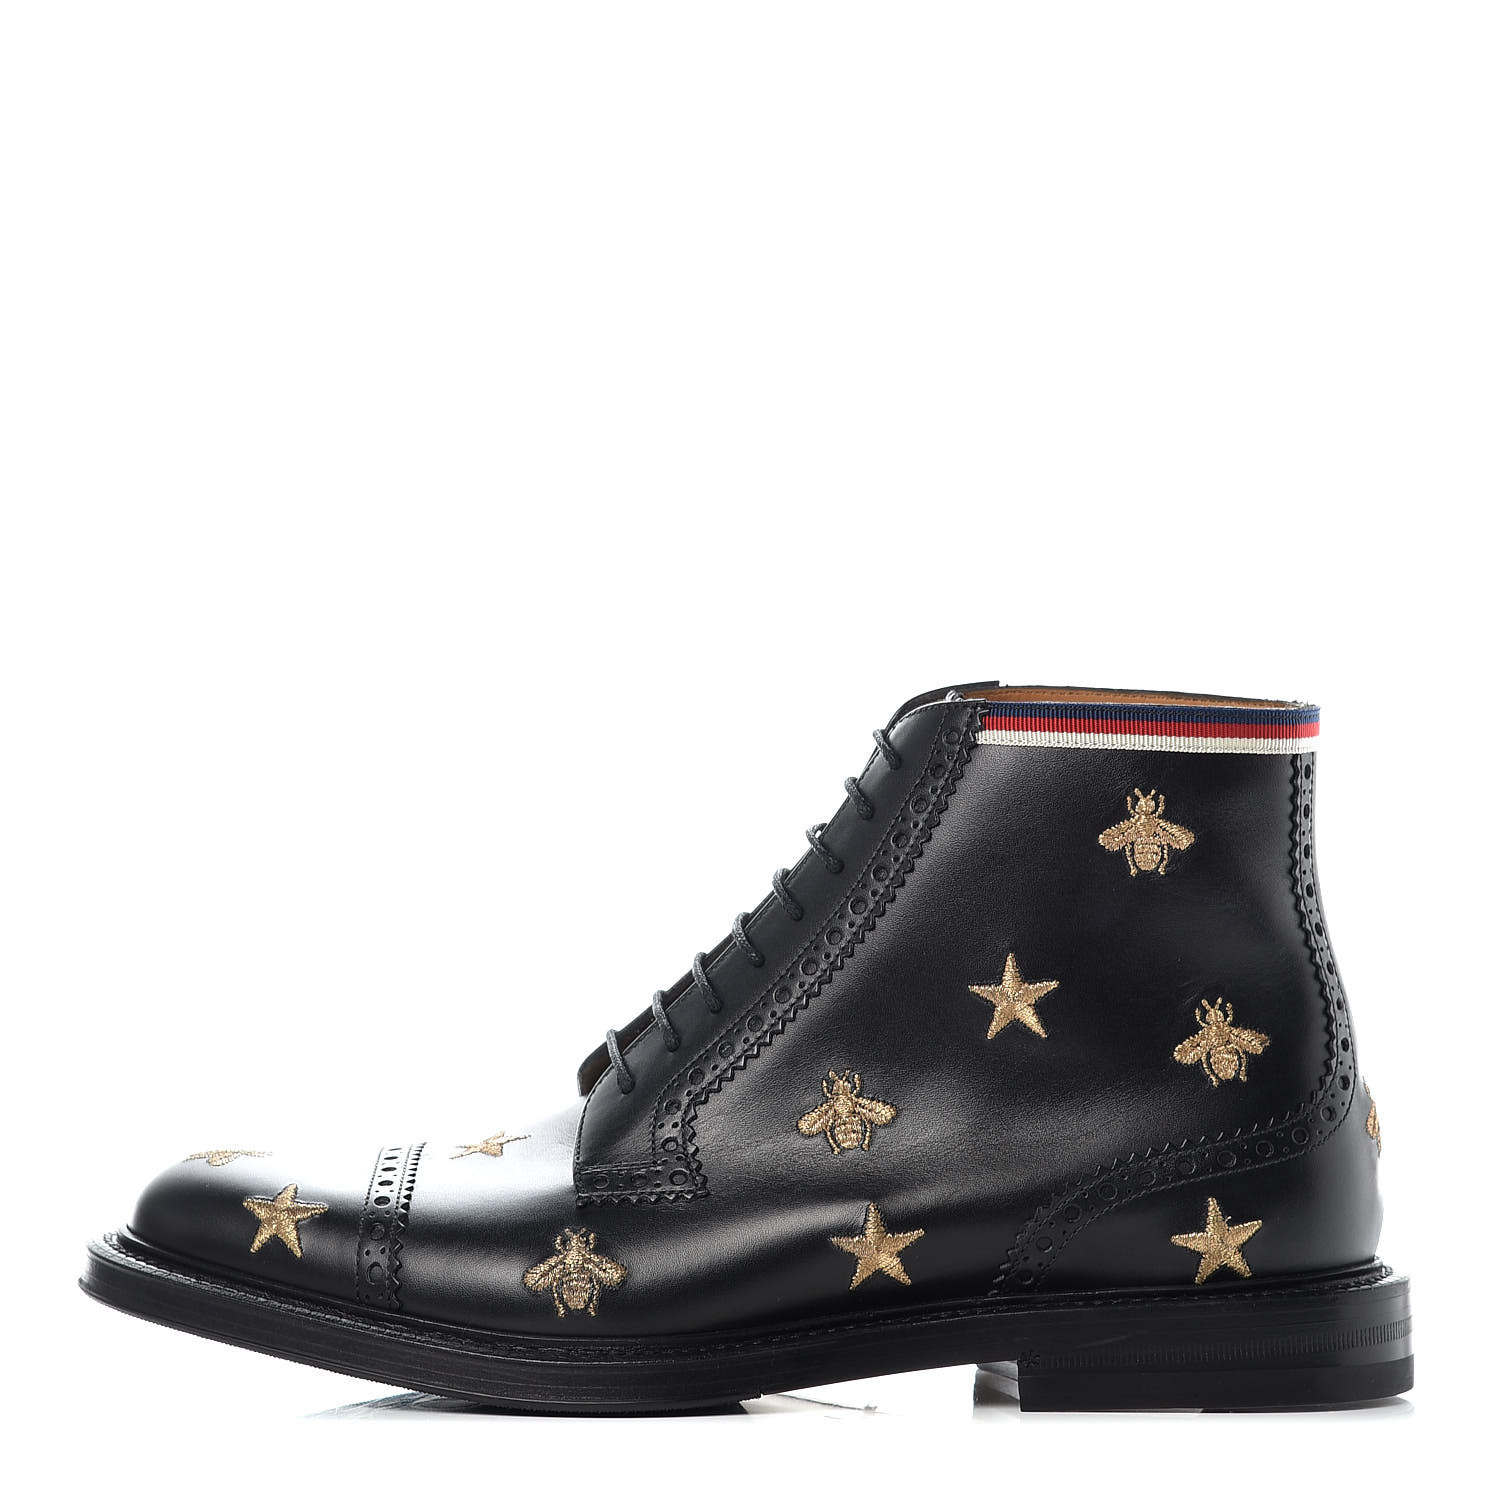 GUCCI Calfskin Mens Embroidered Bee Star Brogue Boots 7.5 Black 407359